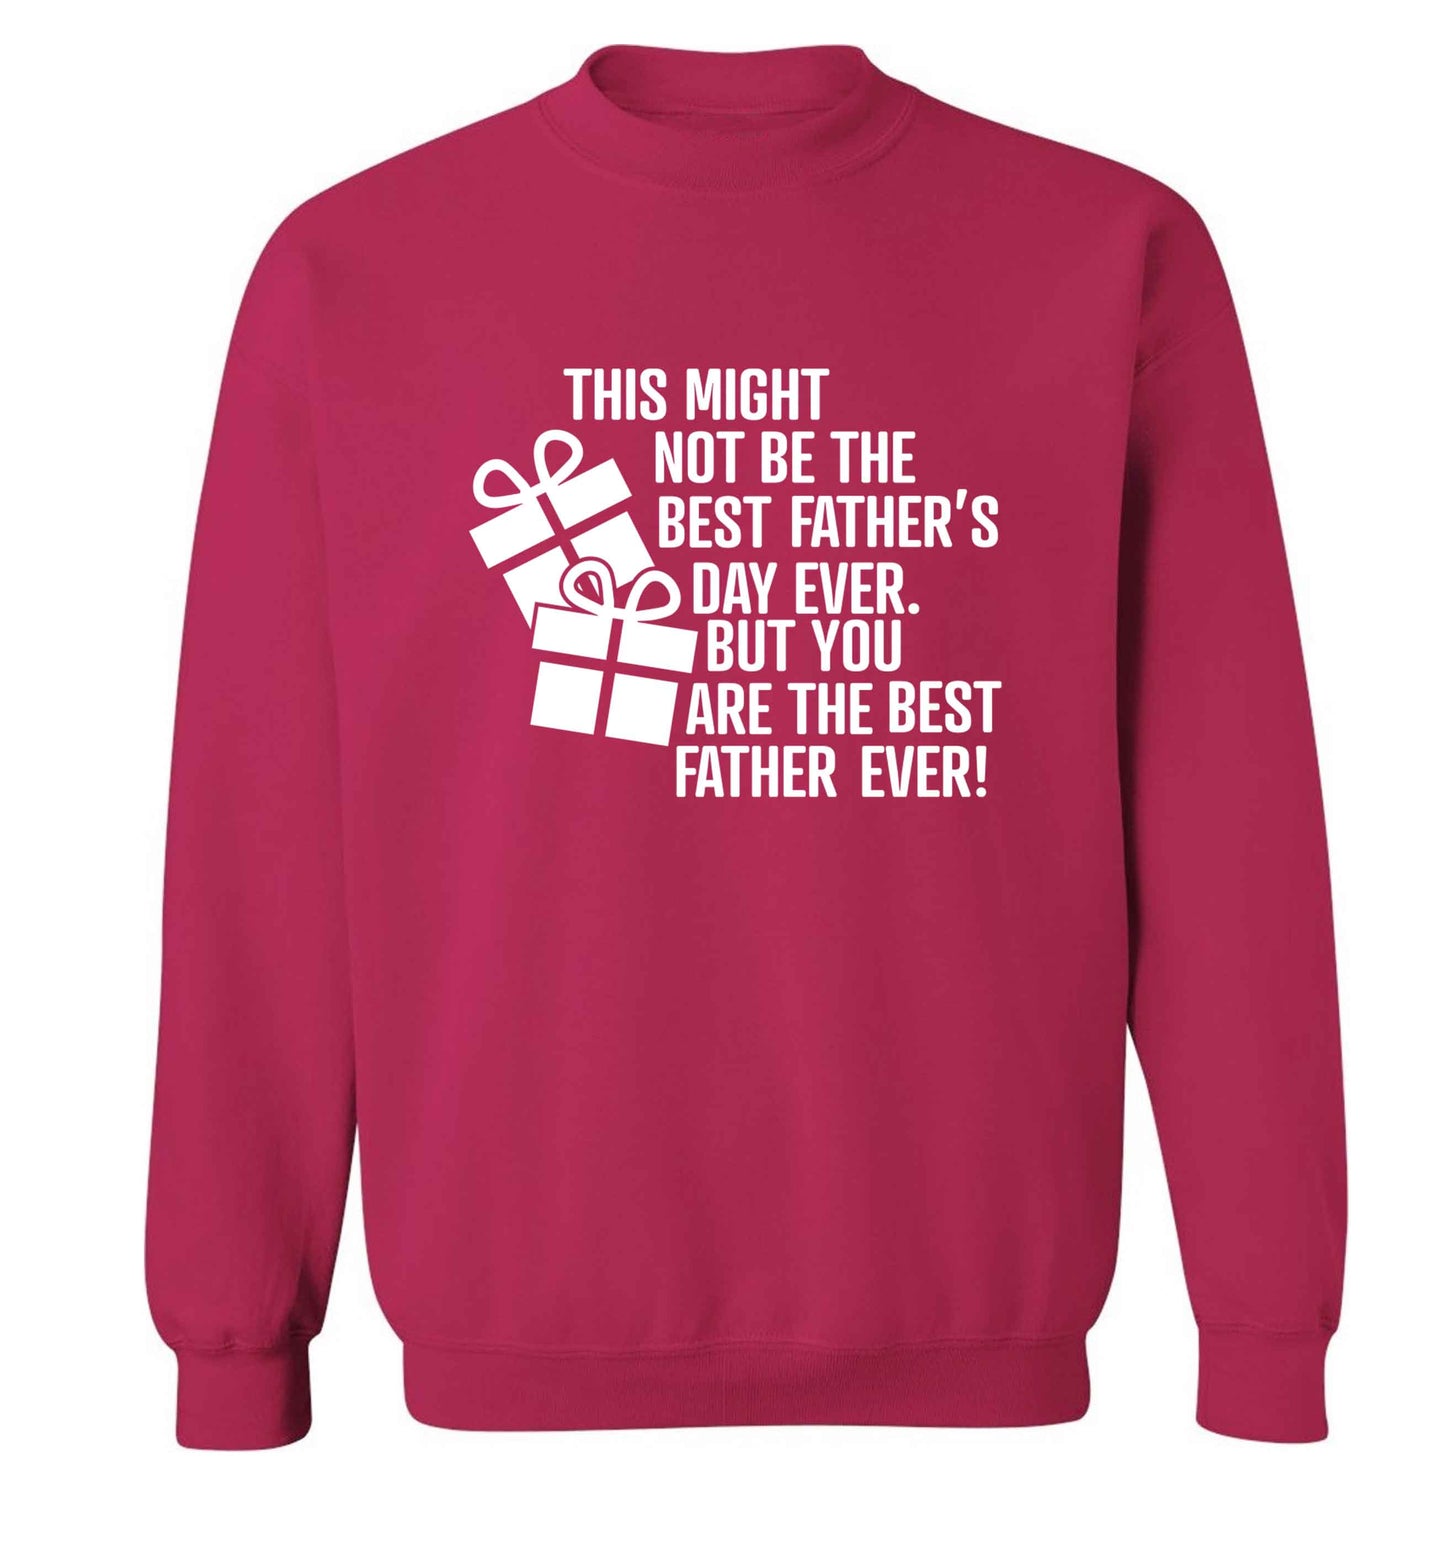 It might not be the best Father's Day ever but you are the best father ever! adult's unisex pink sweater 2XL